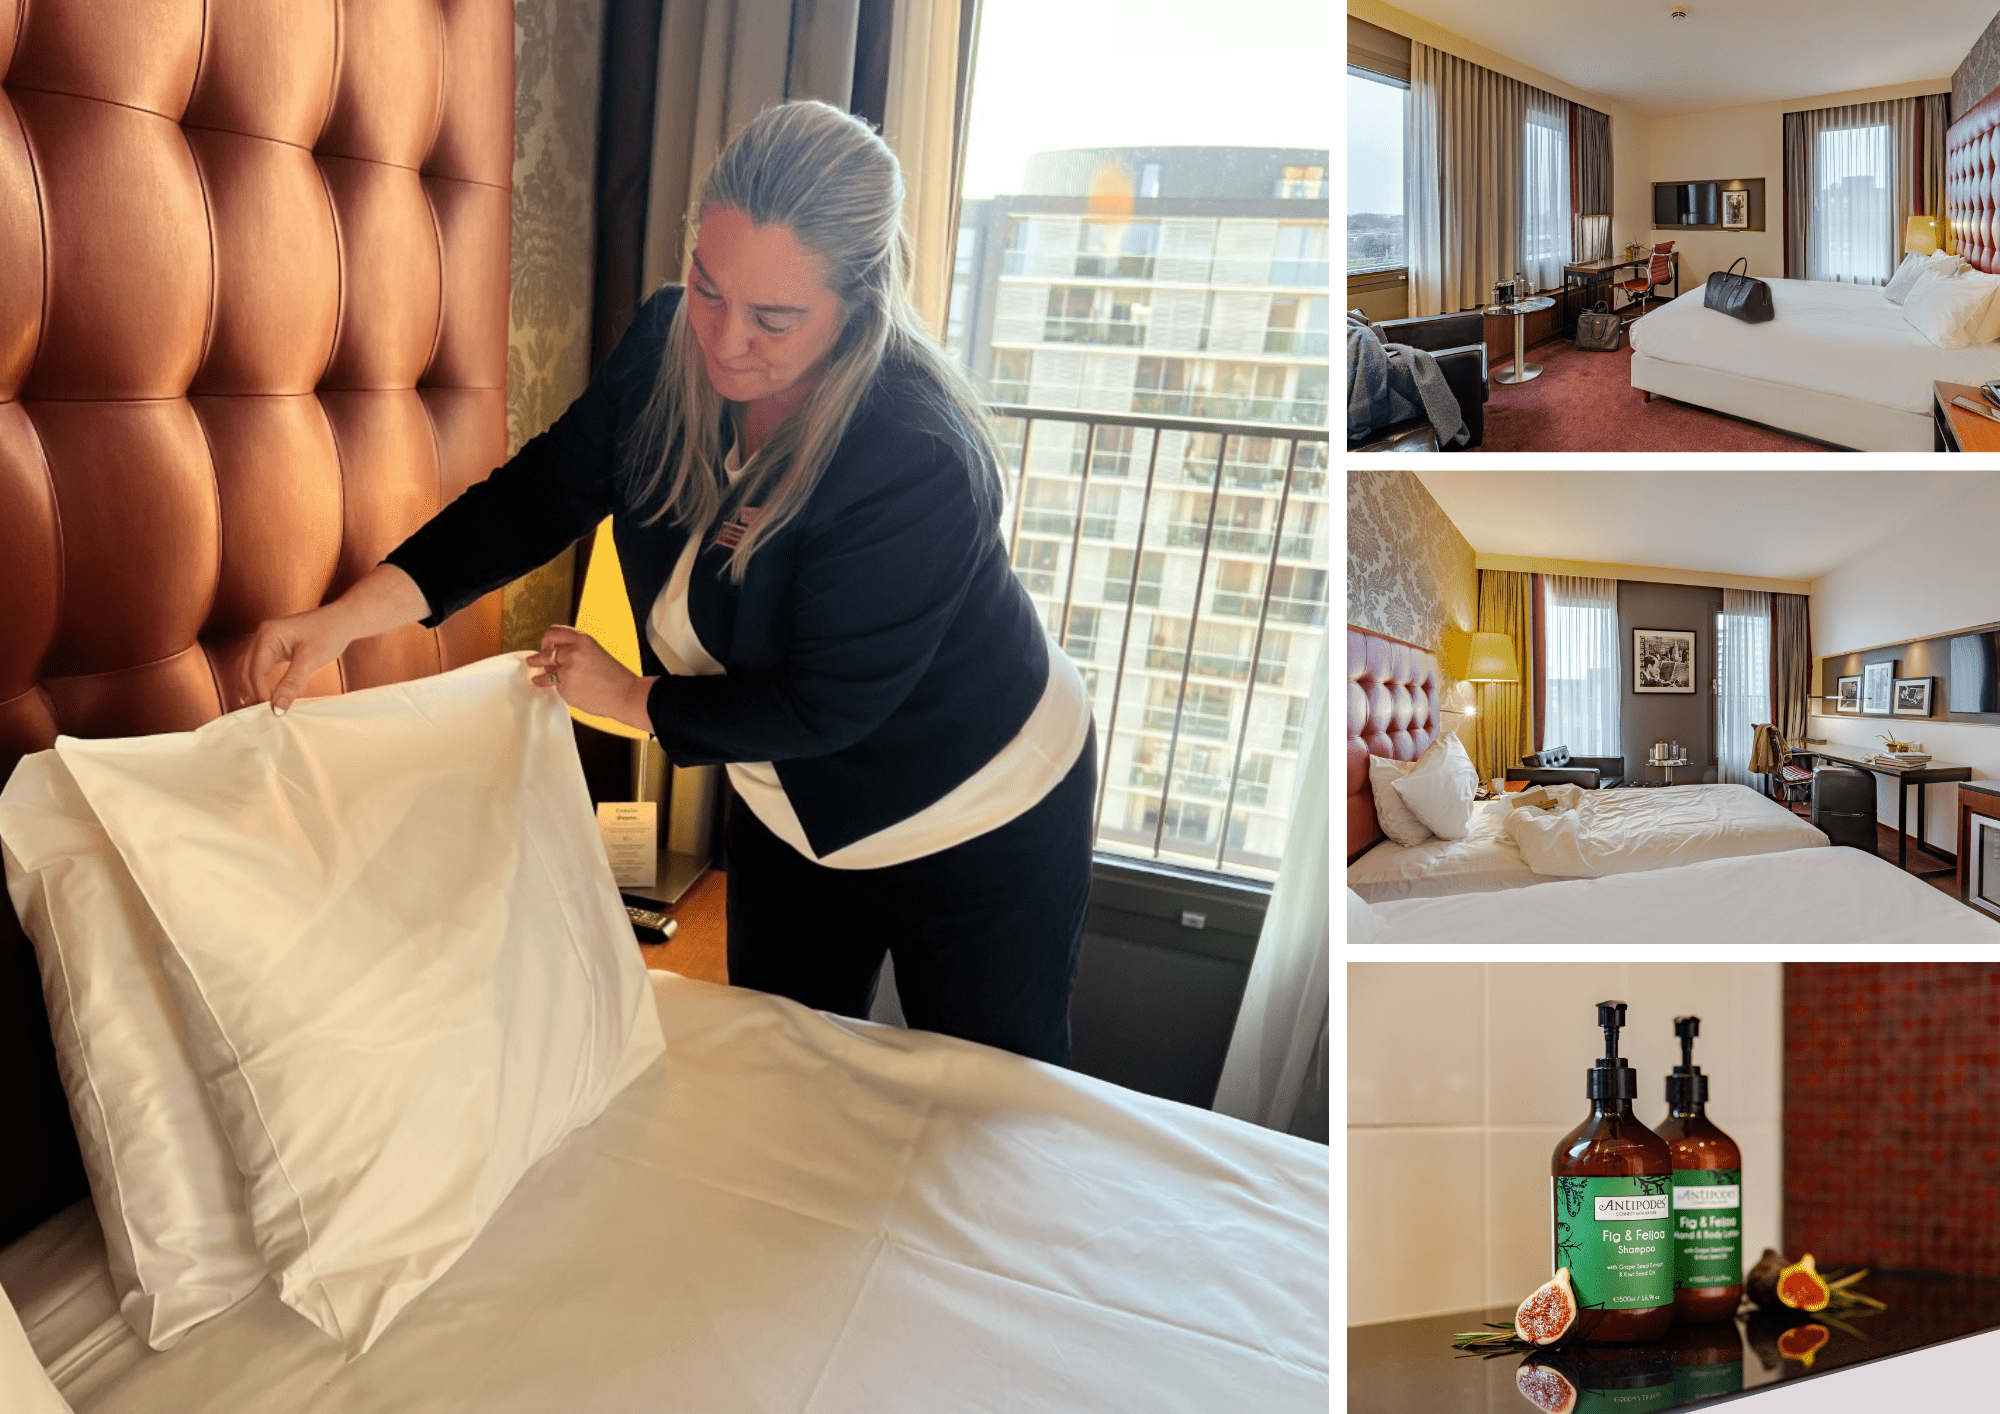 Dare to connect with the Housekeeping manager Helma